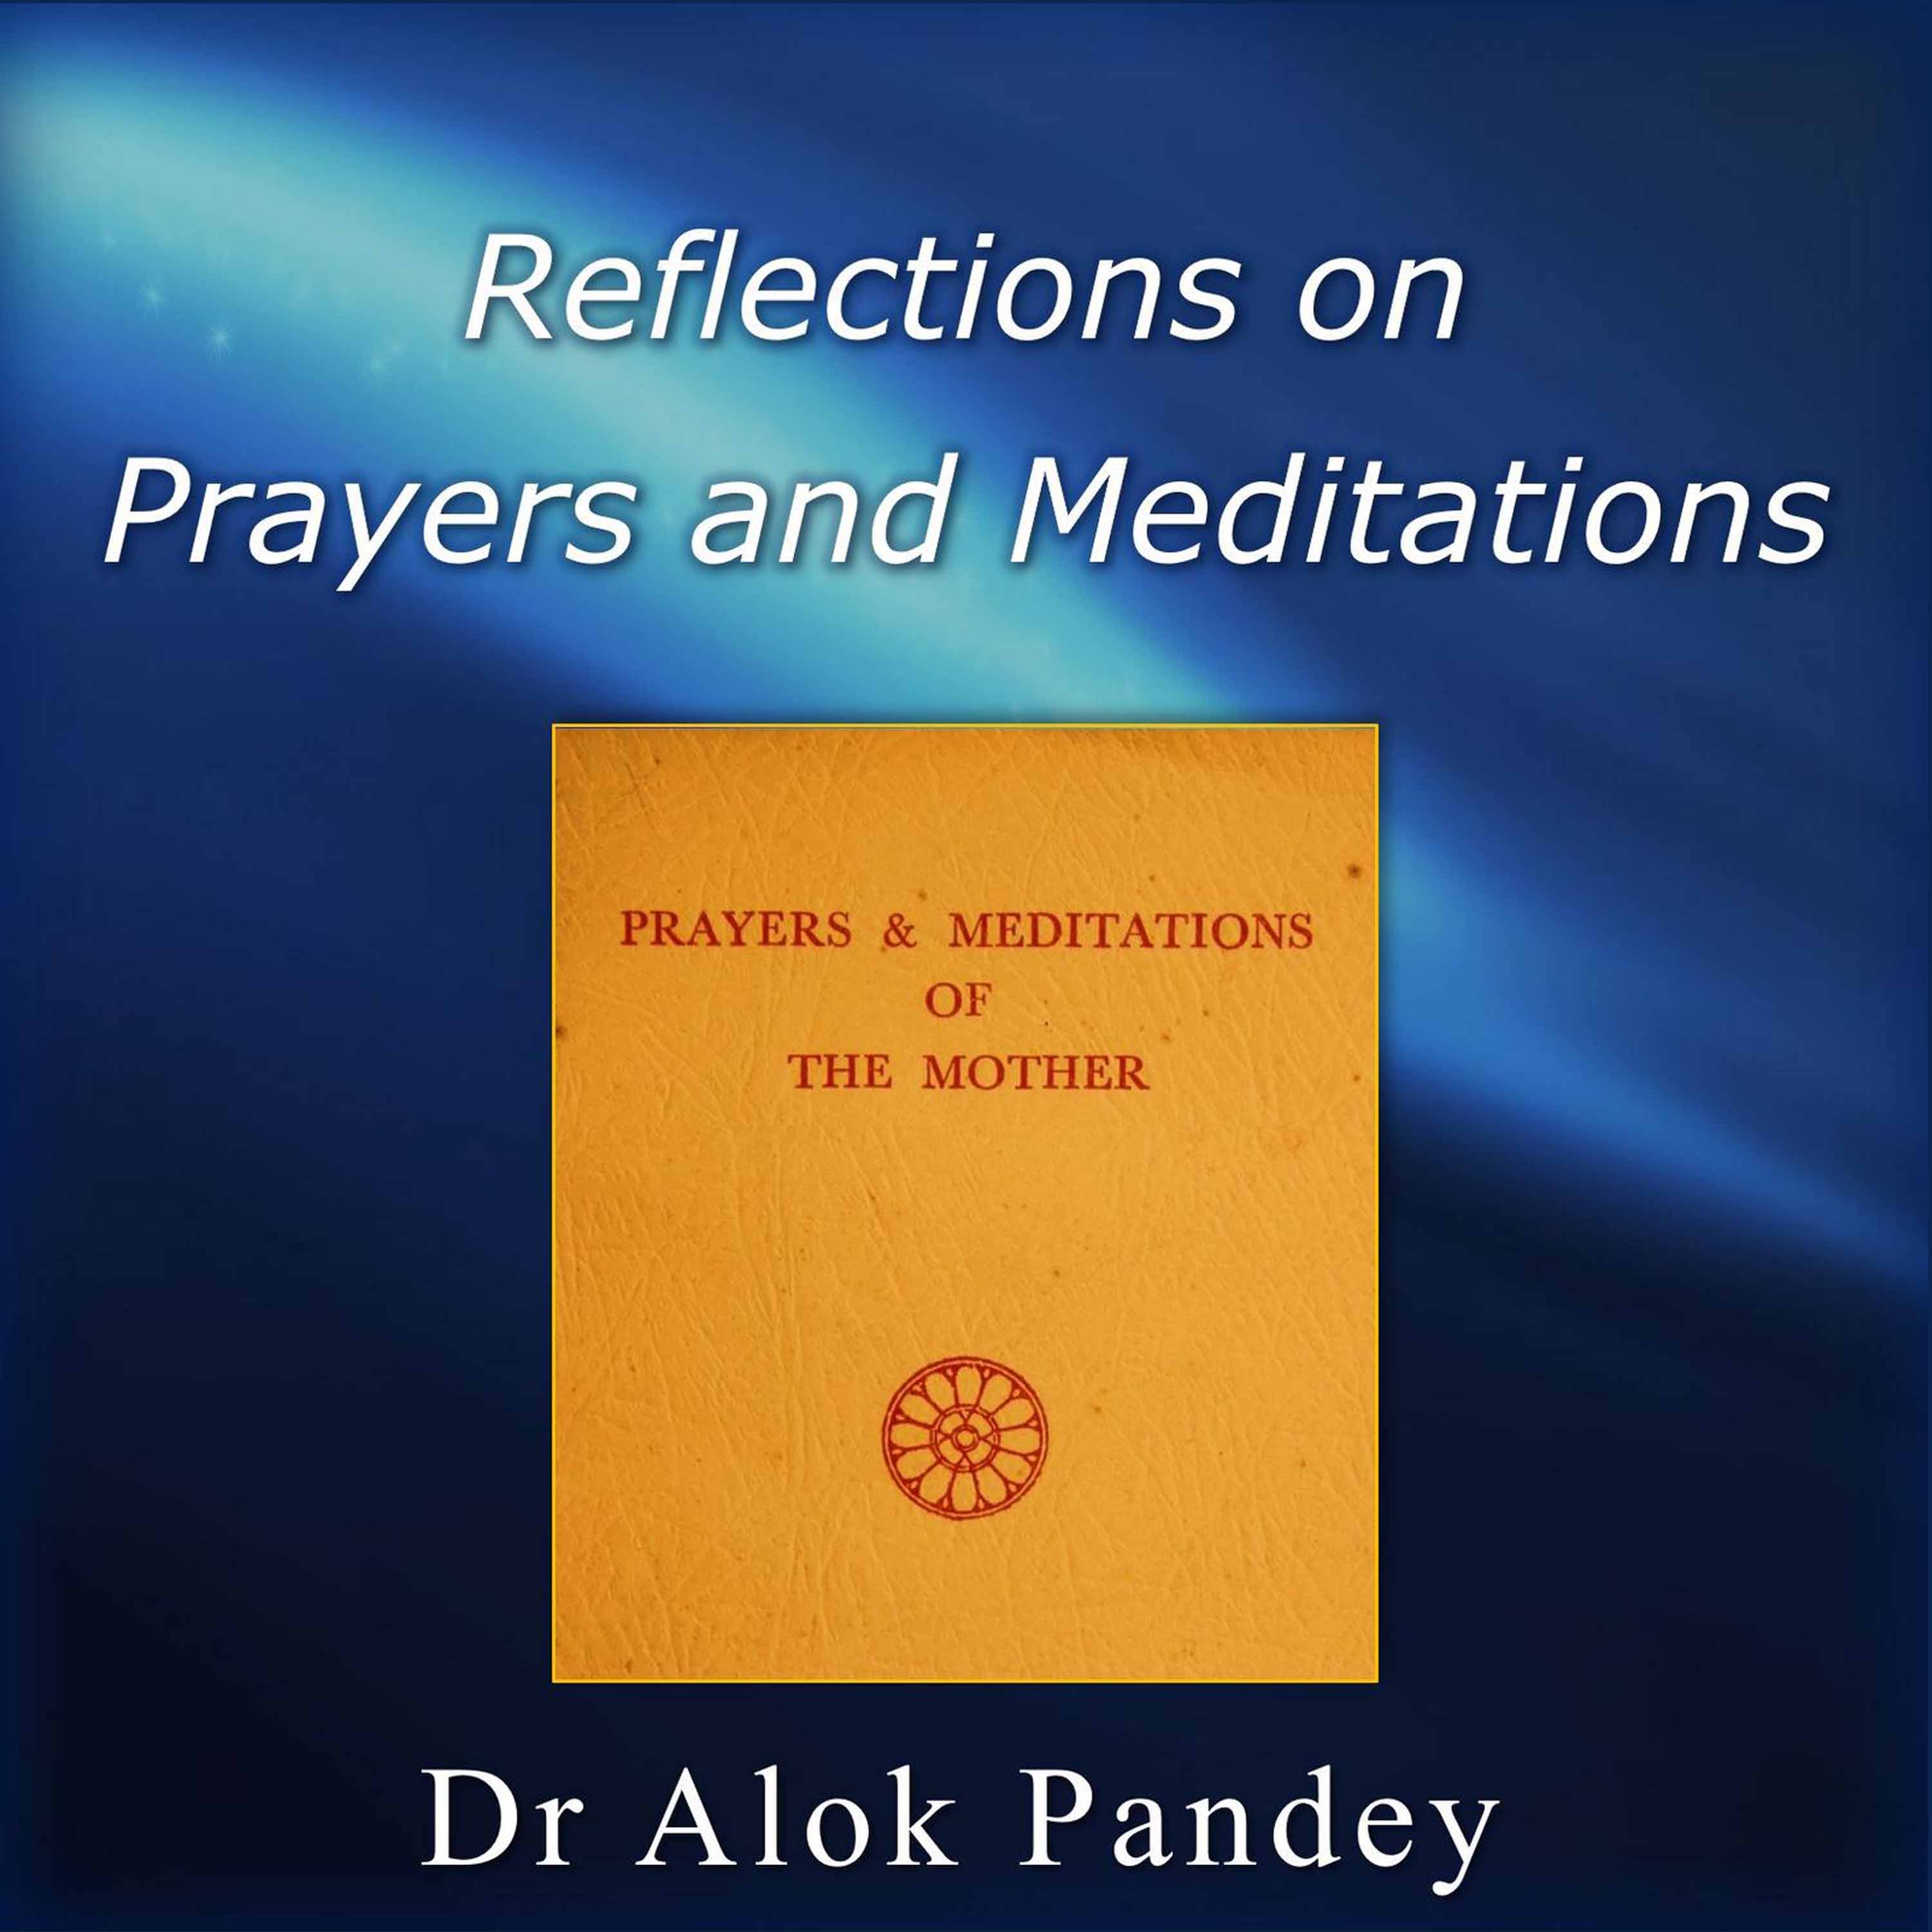 Reflections on Prayers and Meditations